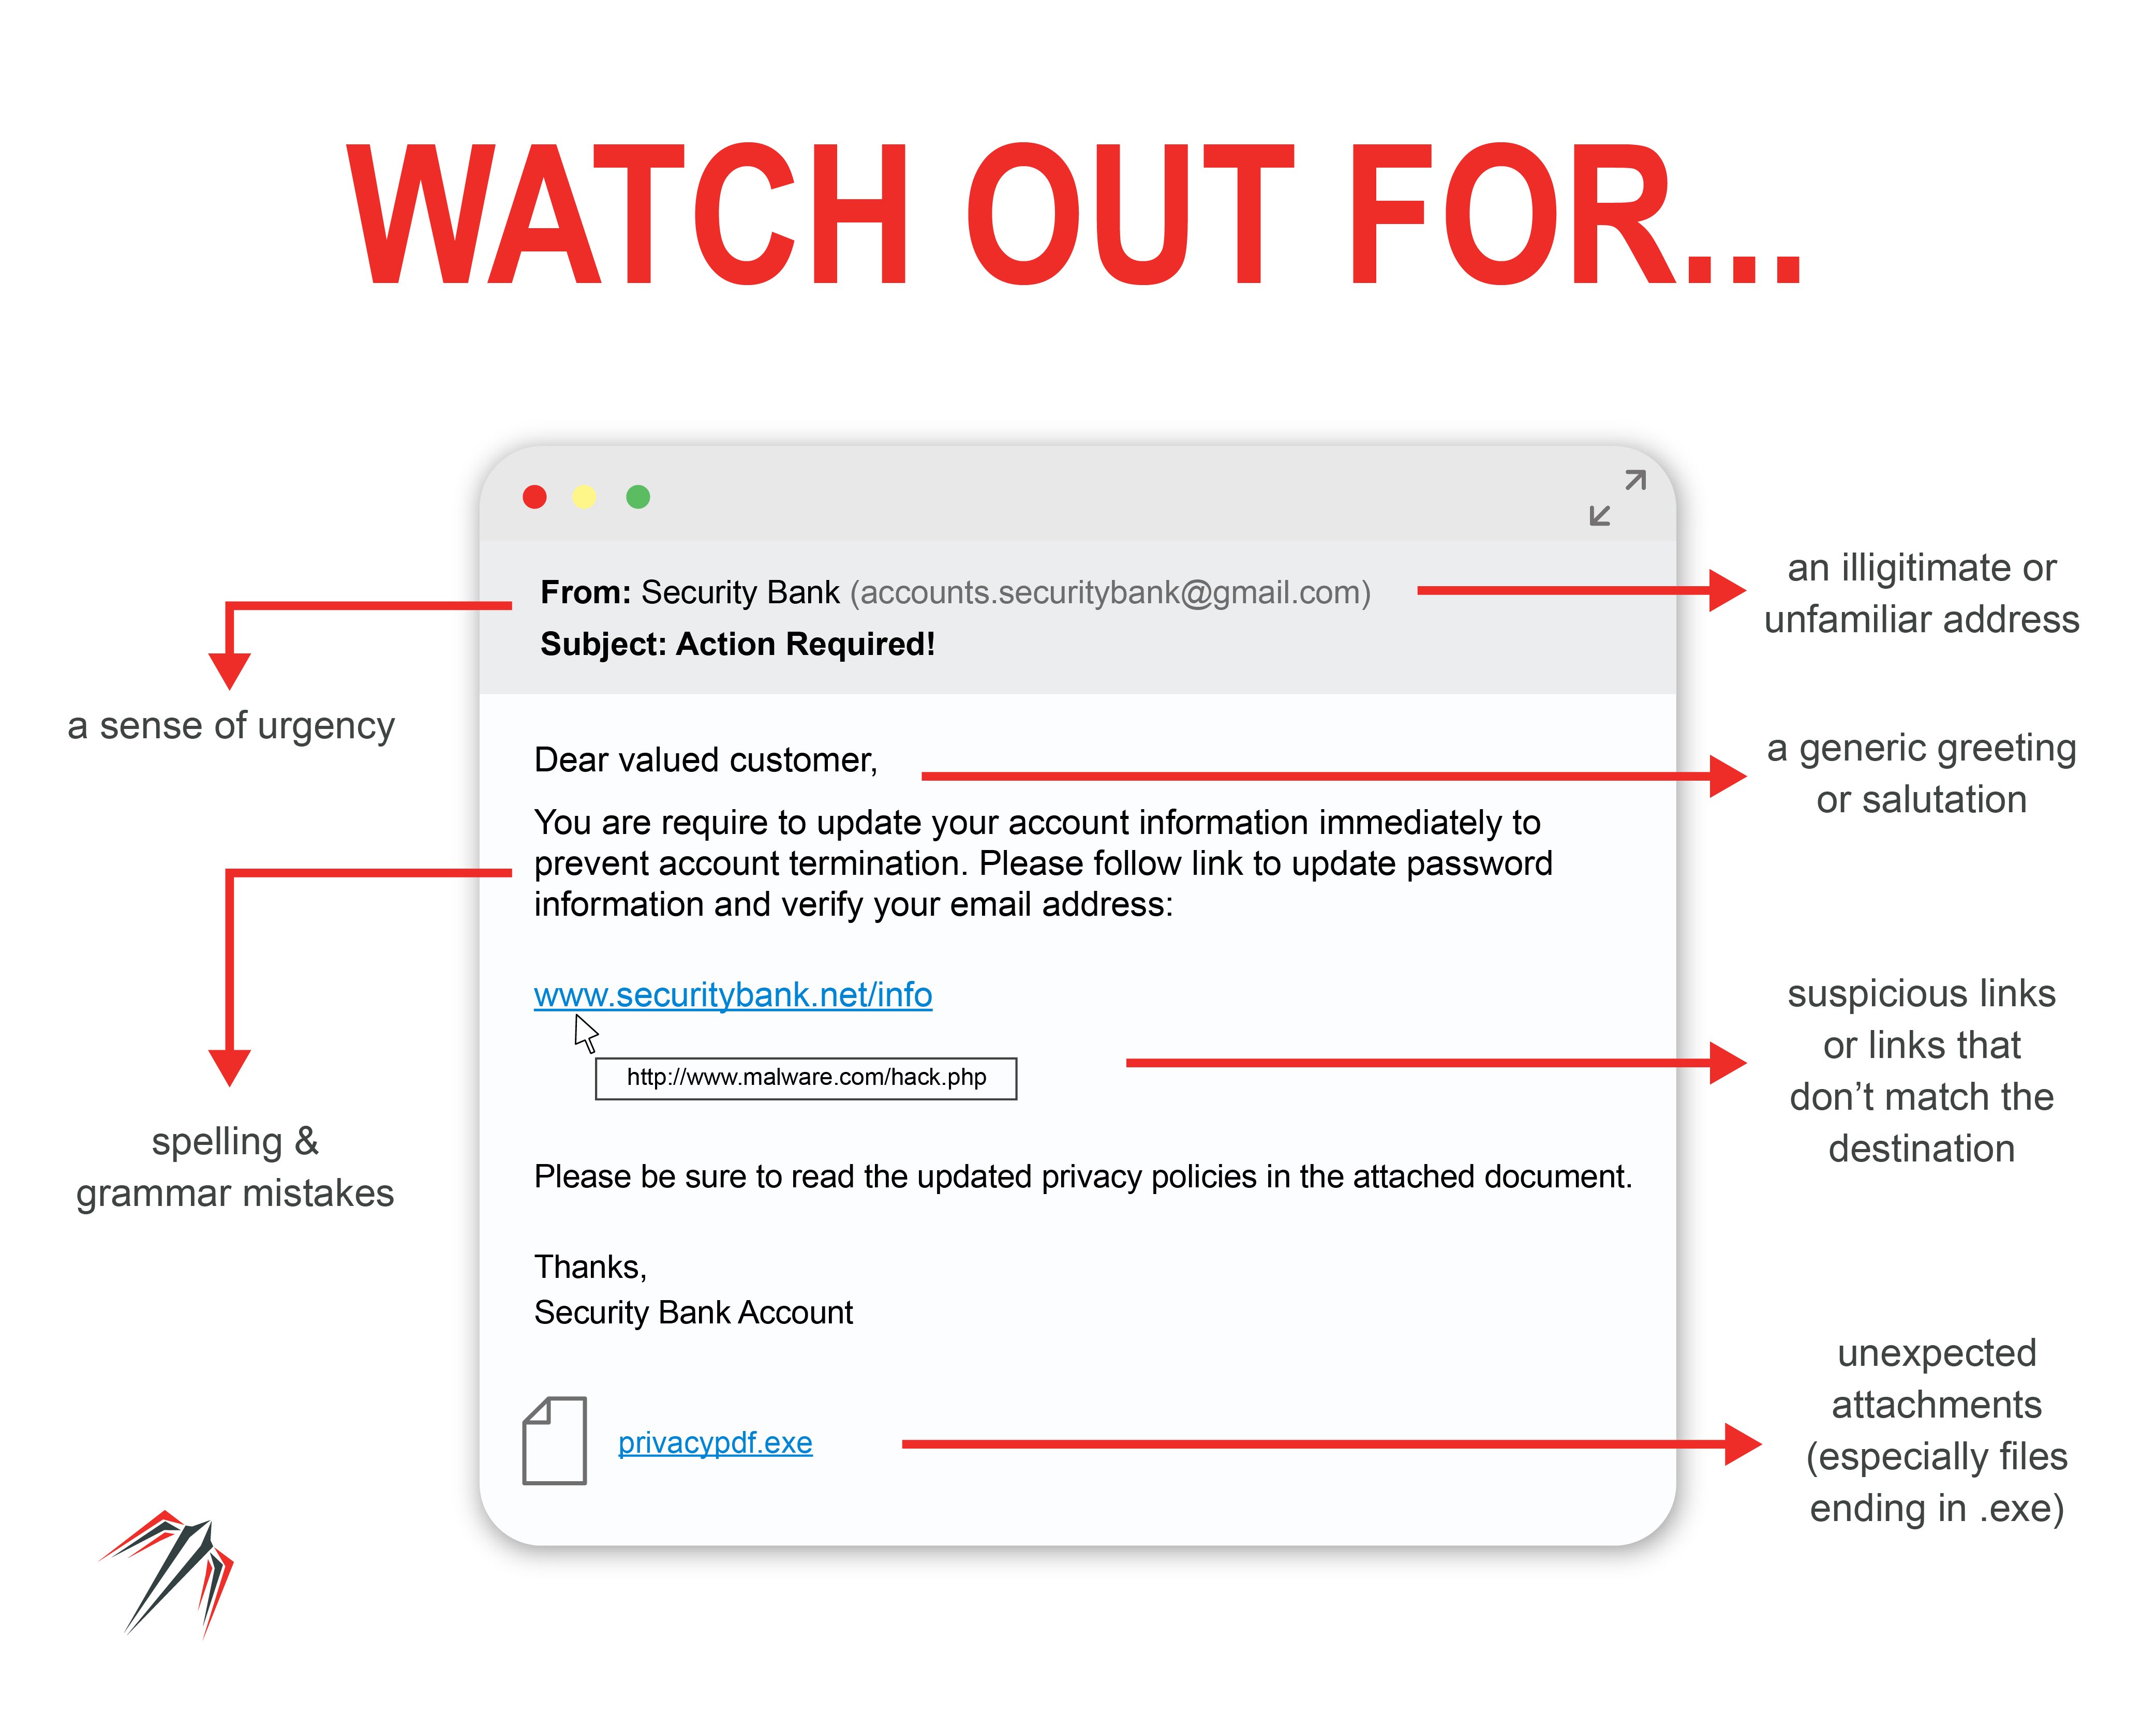 What to watch out for in a phishing email...